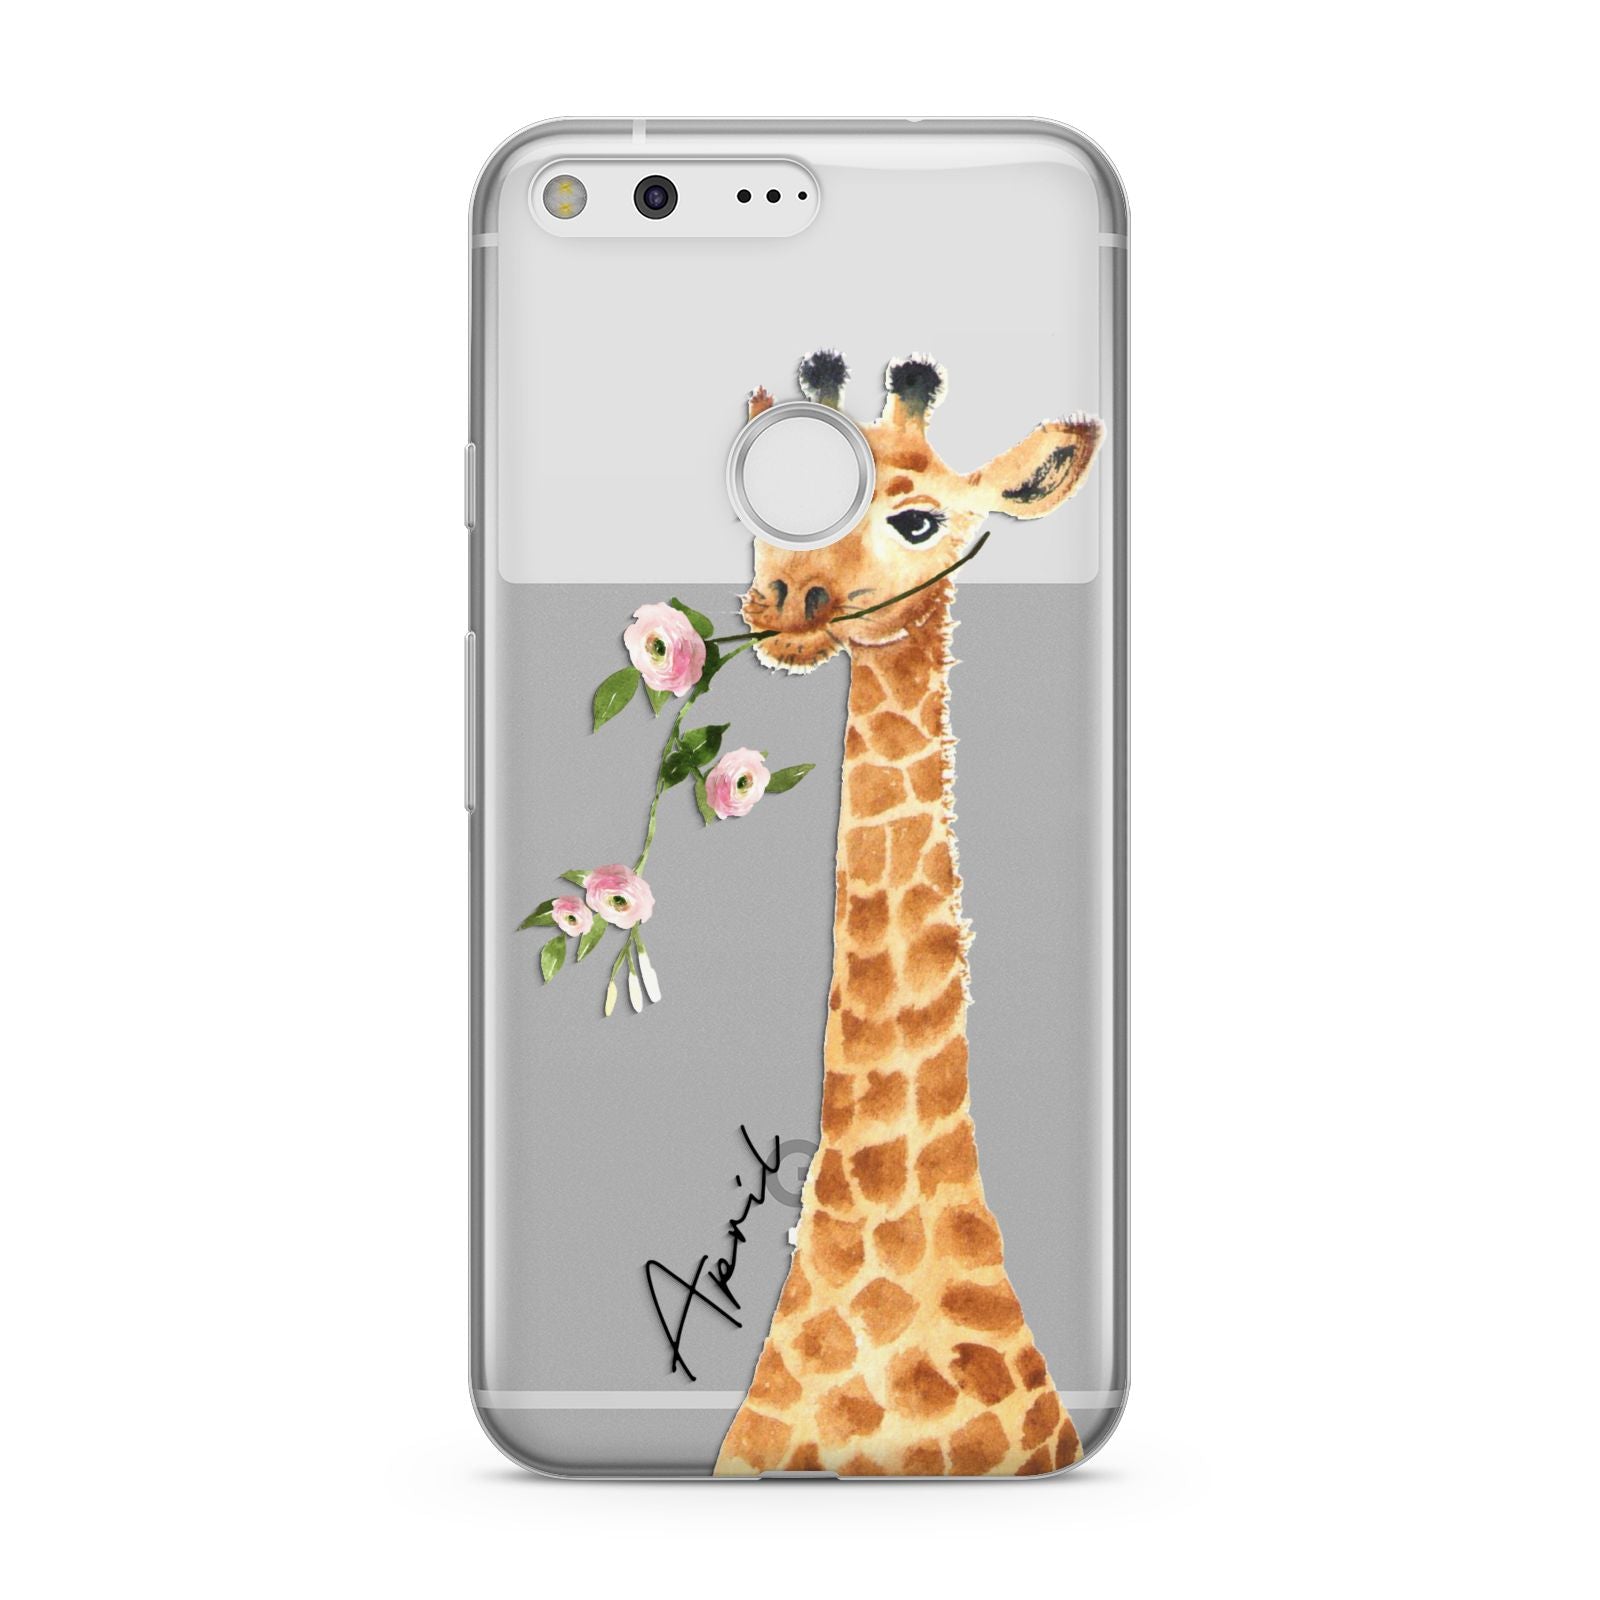 Personalised Giraffe with Name Google Pixel Case